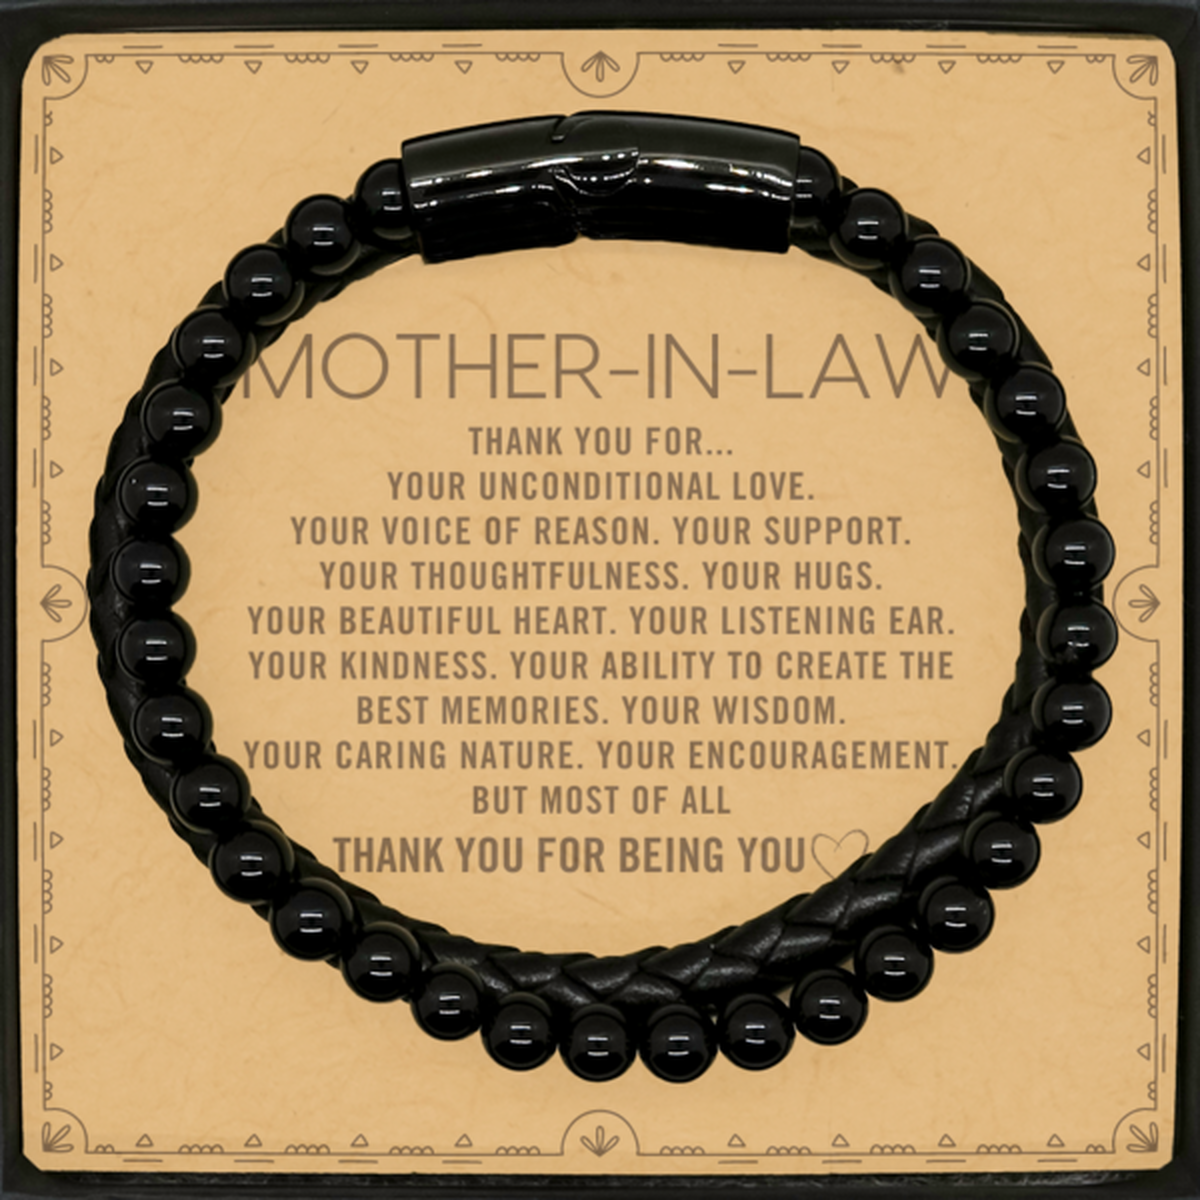 Mother-In-Law Stone Leather Bracelets Custom, Message Card Gifts For Mother-In-Law Christmas Graduation Birthday Gifts for Men Women Mother-In-Law Thank you for Your unconditional love